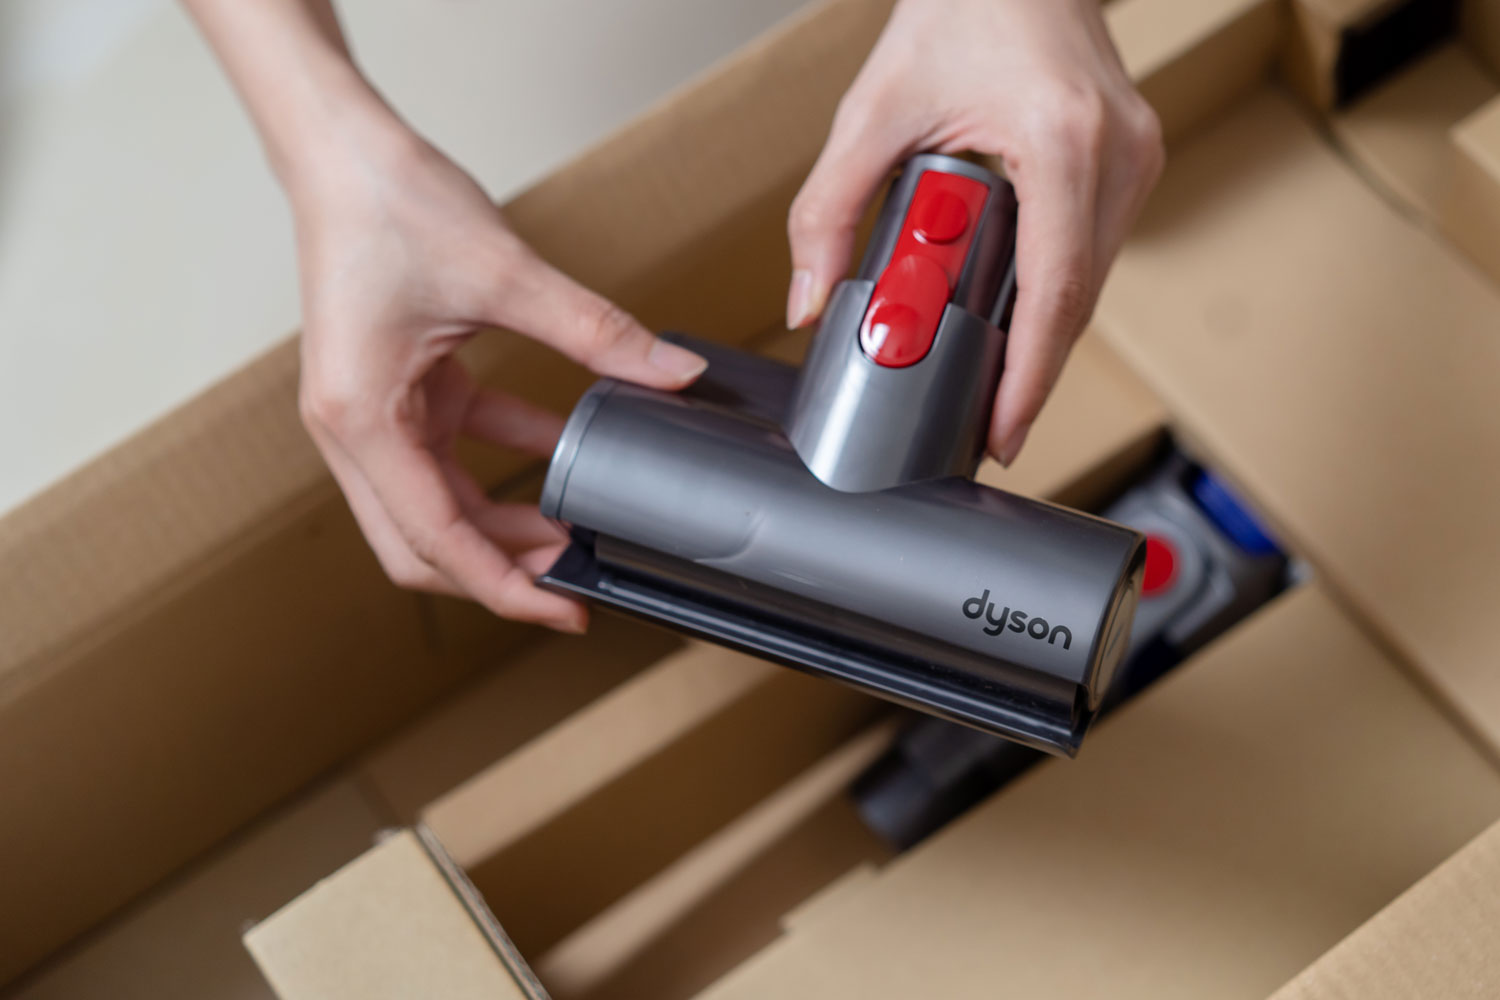 Unboxing a new Dyson Vacuum cleaner